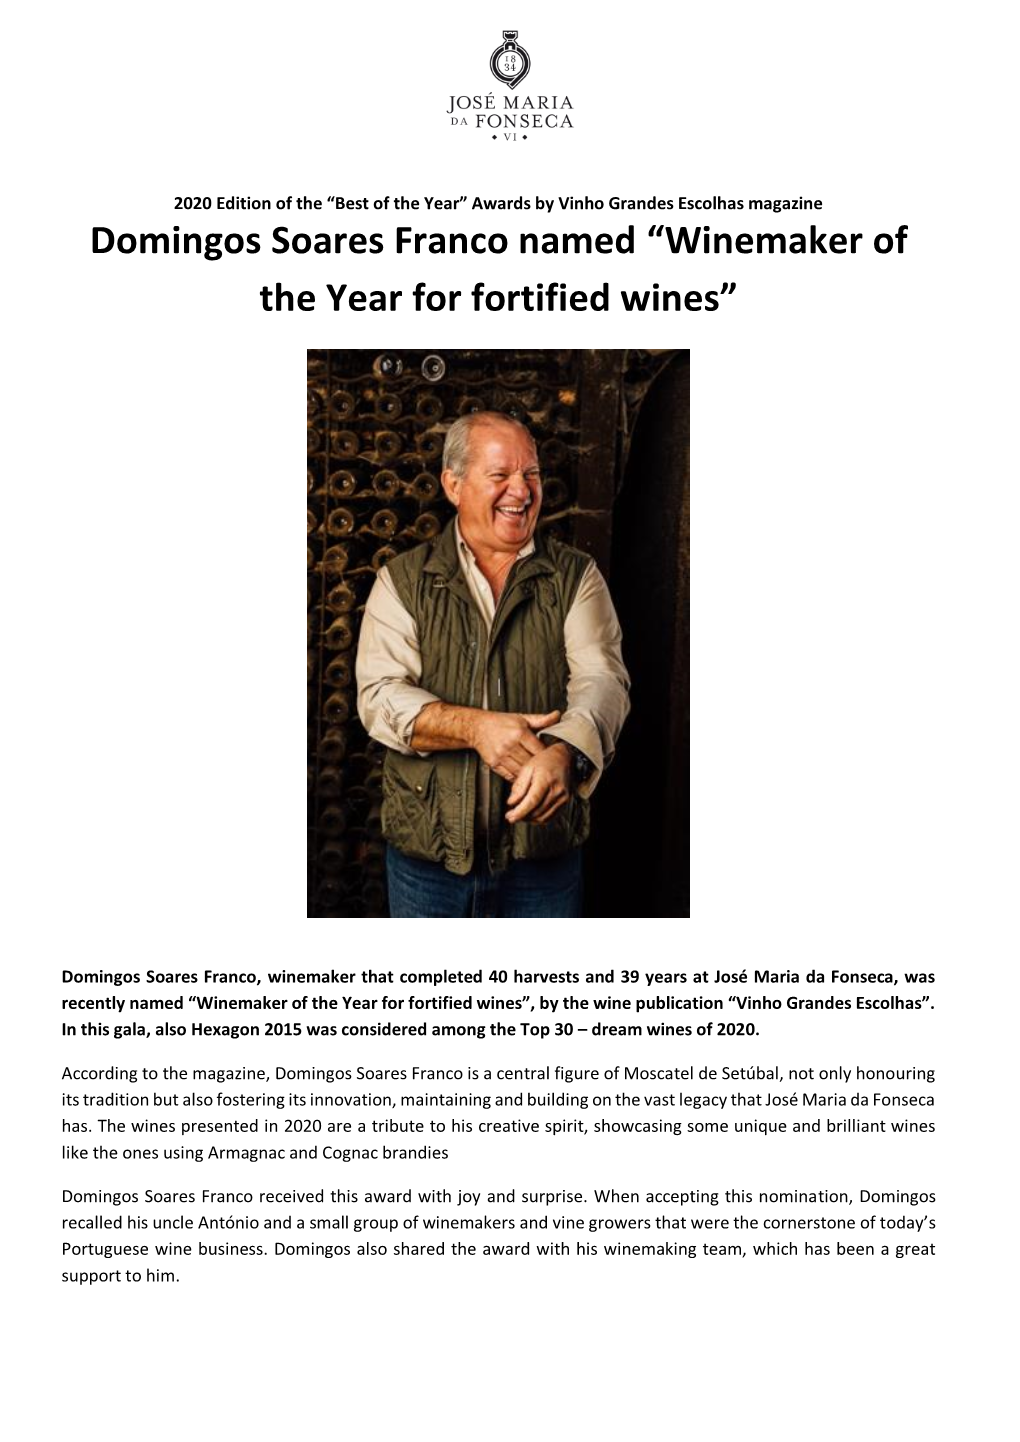 Domingos Soares Franco Named “Winemaker of the Year for Fortified Wines”